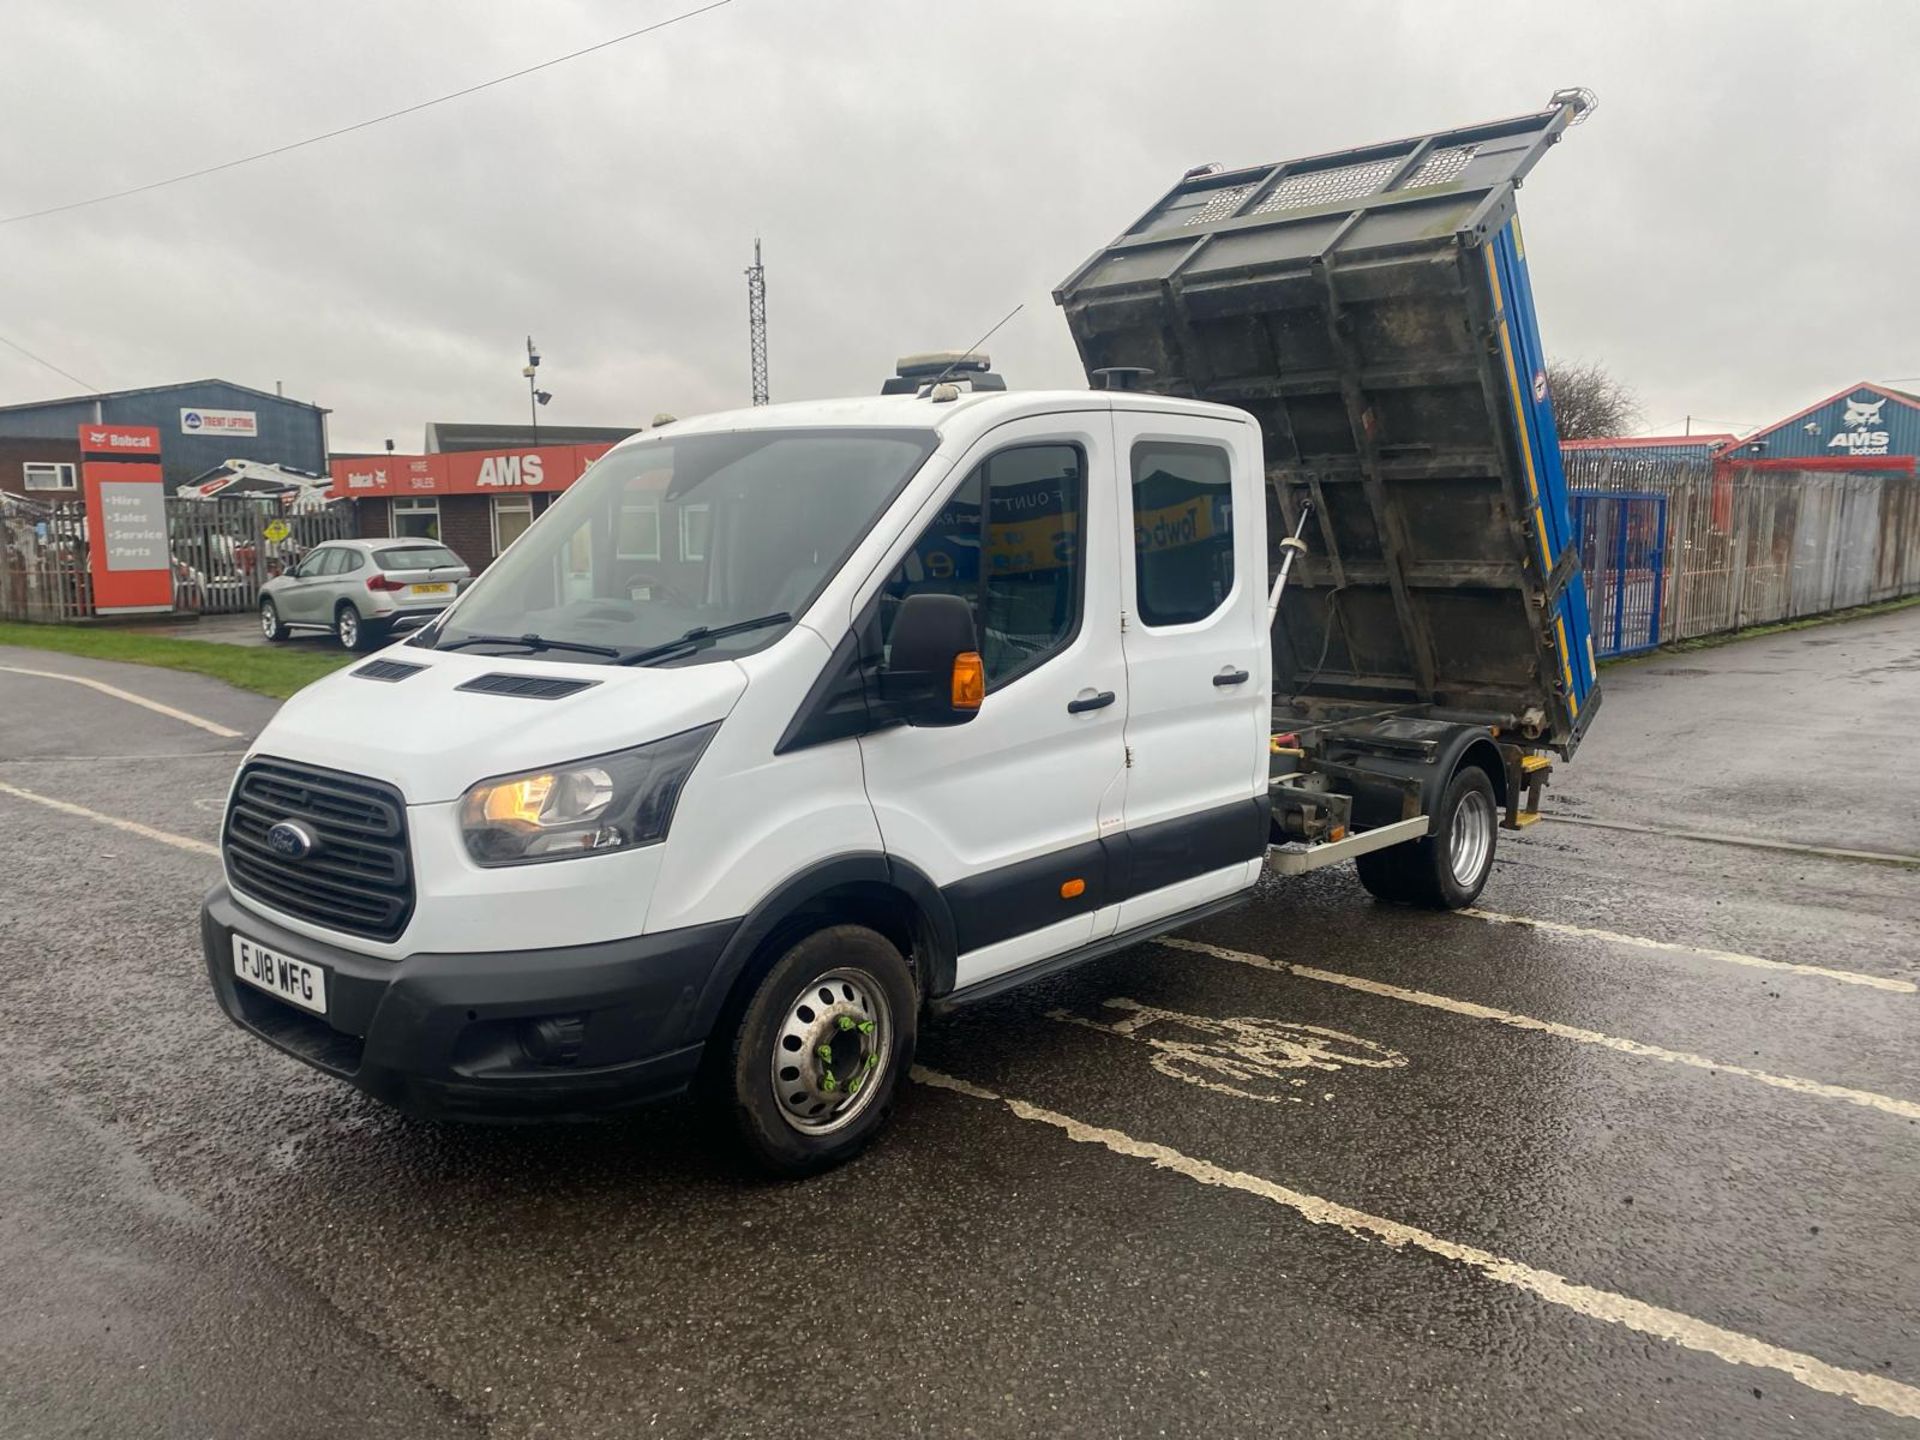 2018 18 FORD TRANSIT 470 TIPPER - 90K MILES - 4.7 TON GROSS - 3 SEATS - RARE TIPPER - TOWBAR. - Image 3 of 15